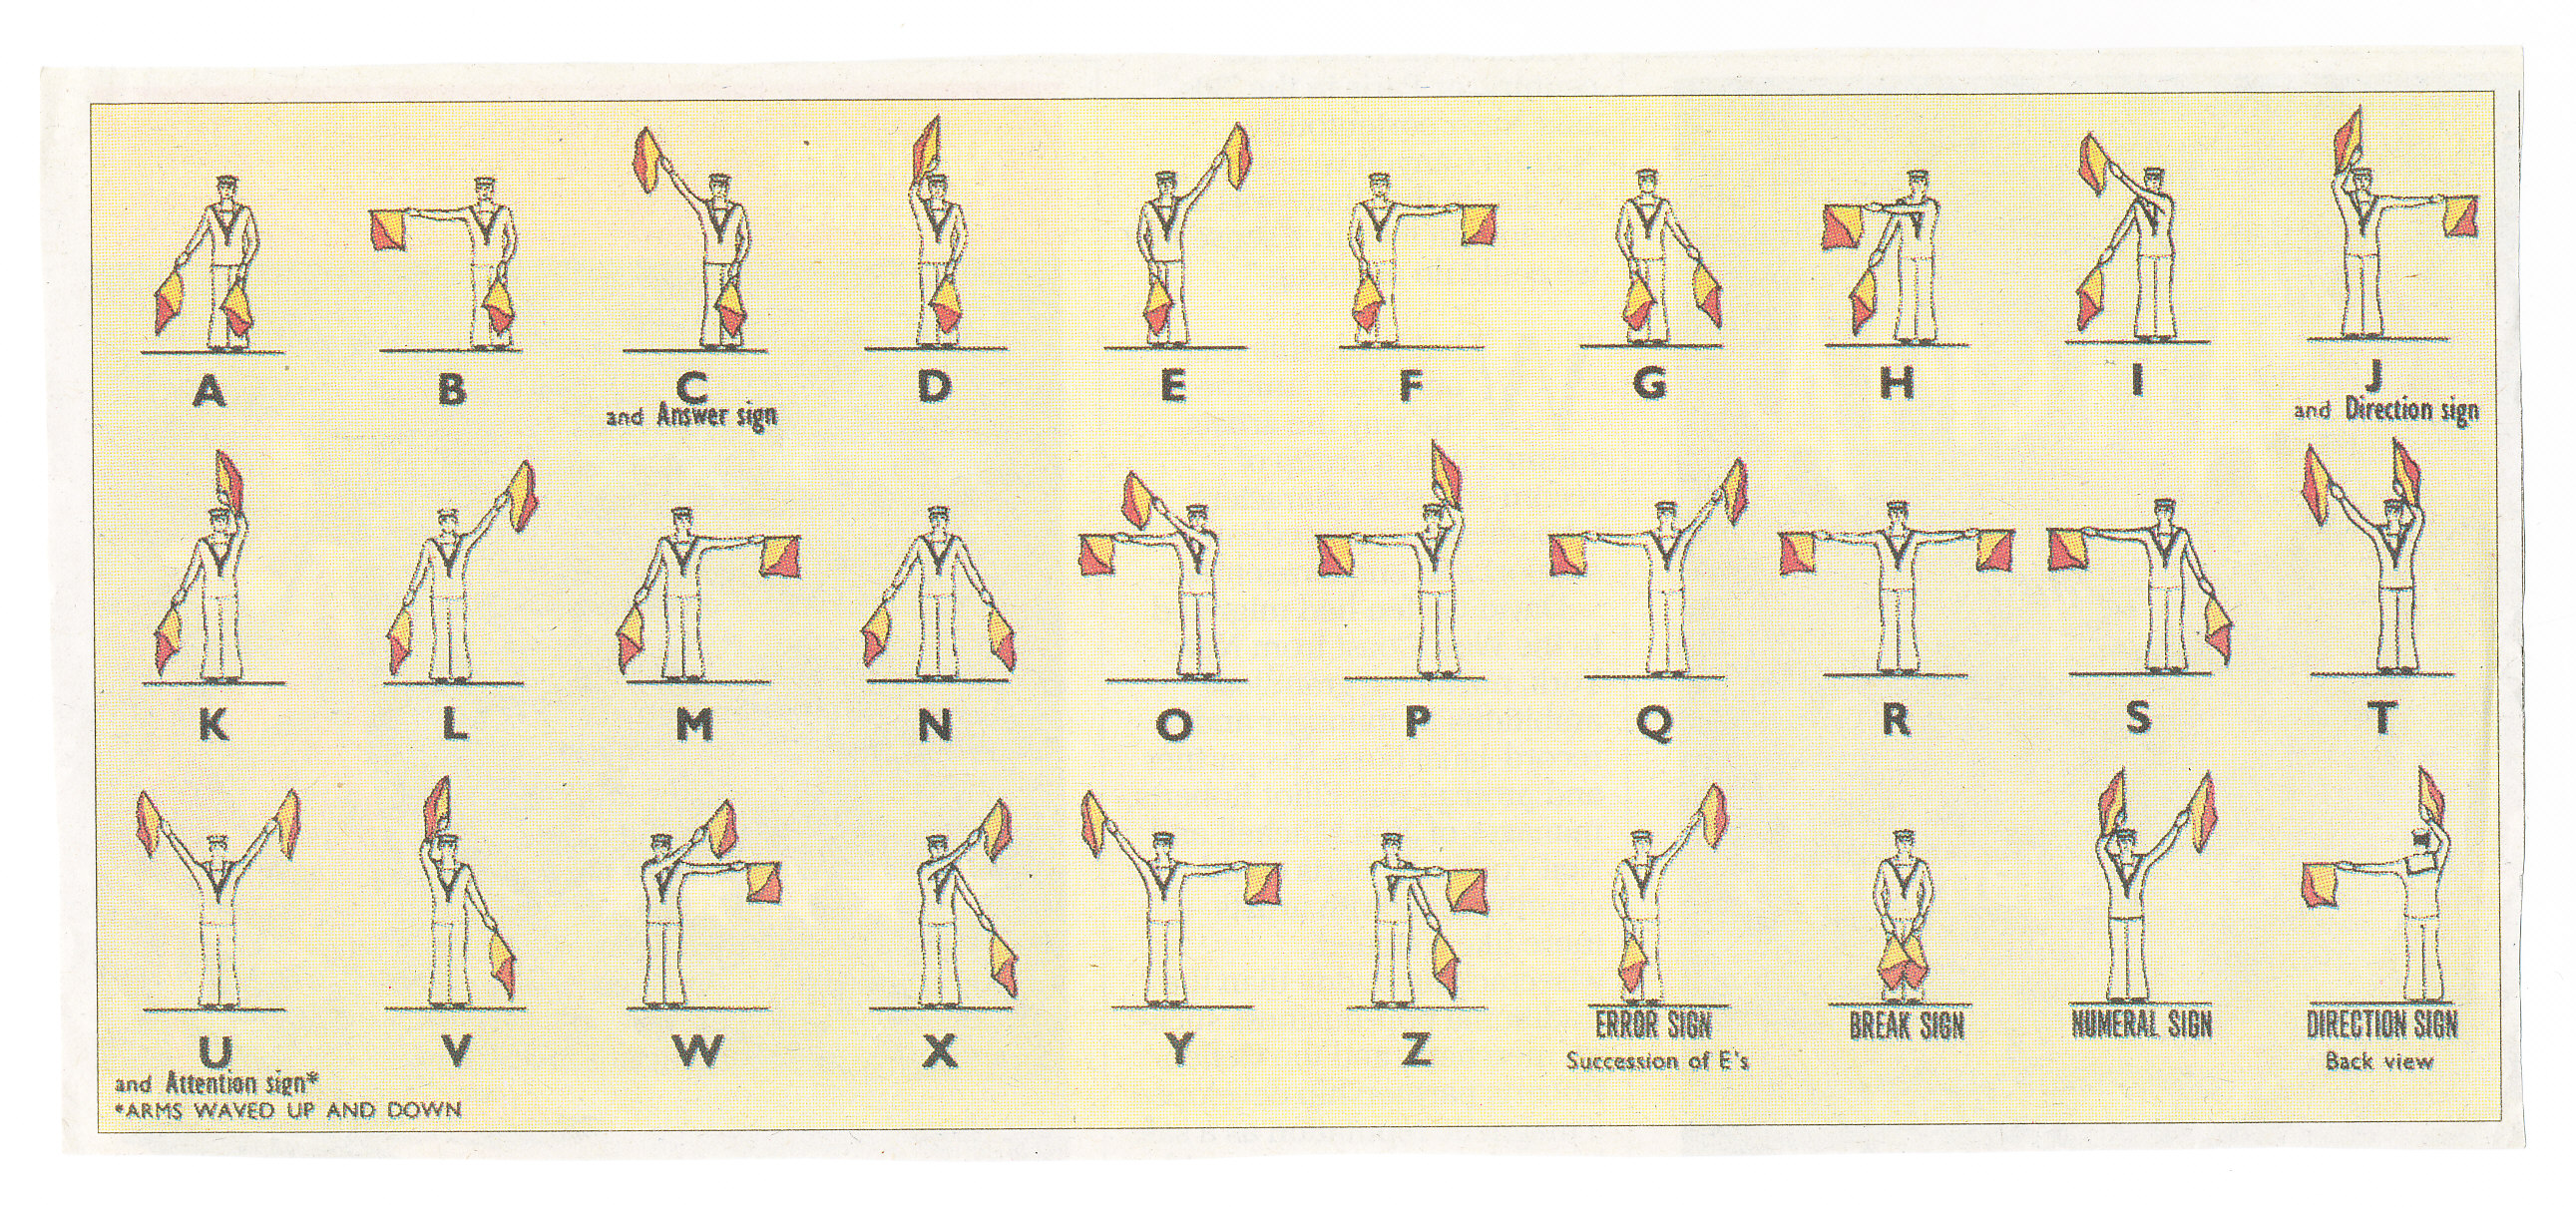 Semaphore Position of Flags image